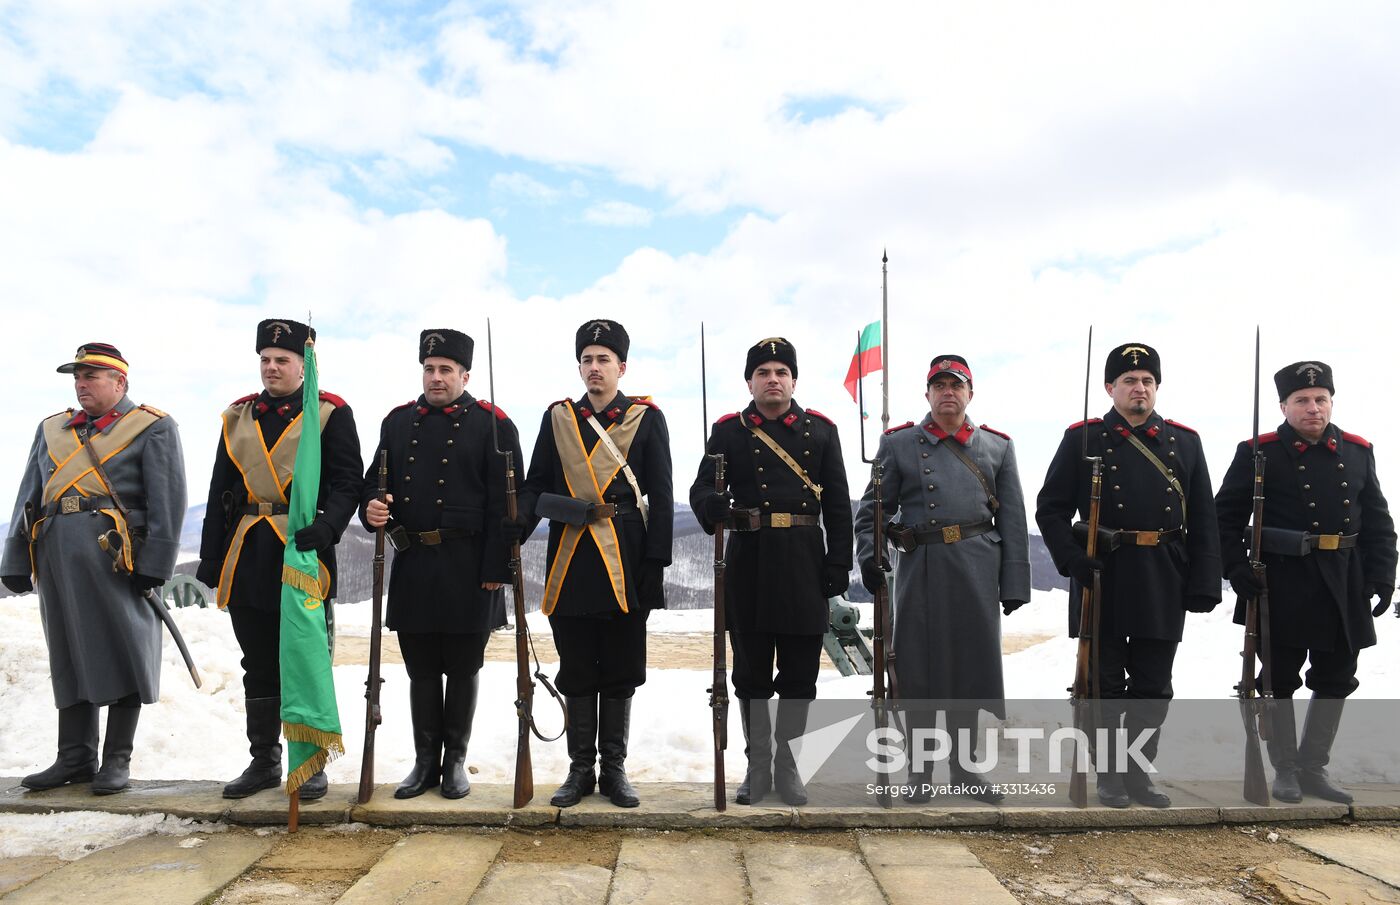 Celebrations of 140th anniversary of Bulgaria's liberation from Ottoman rule